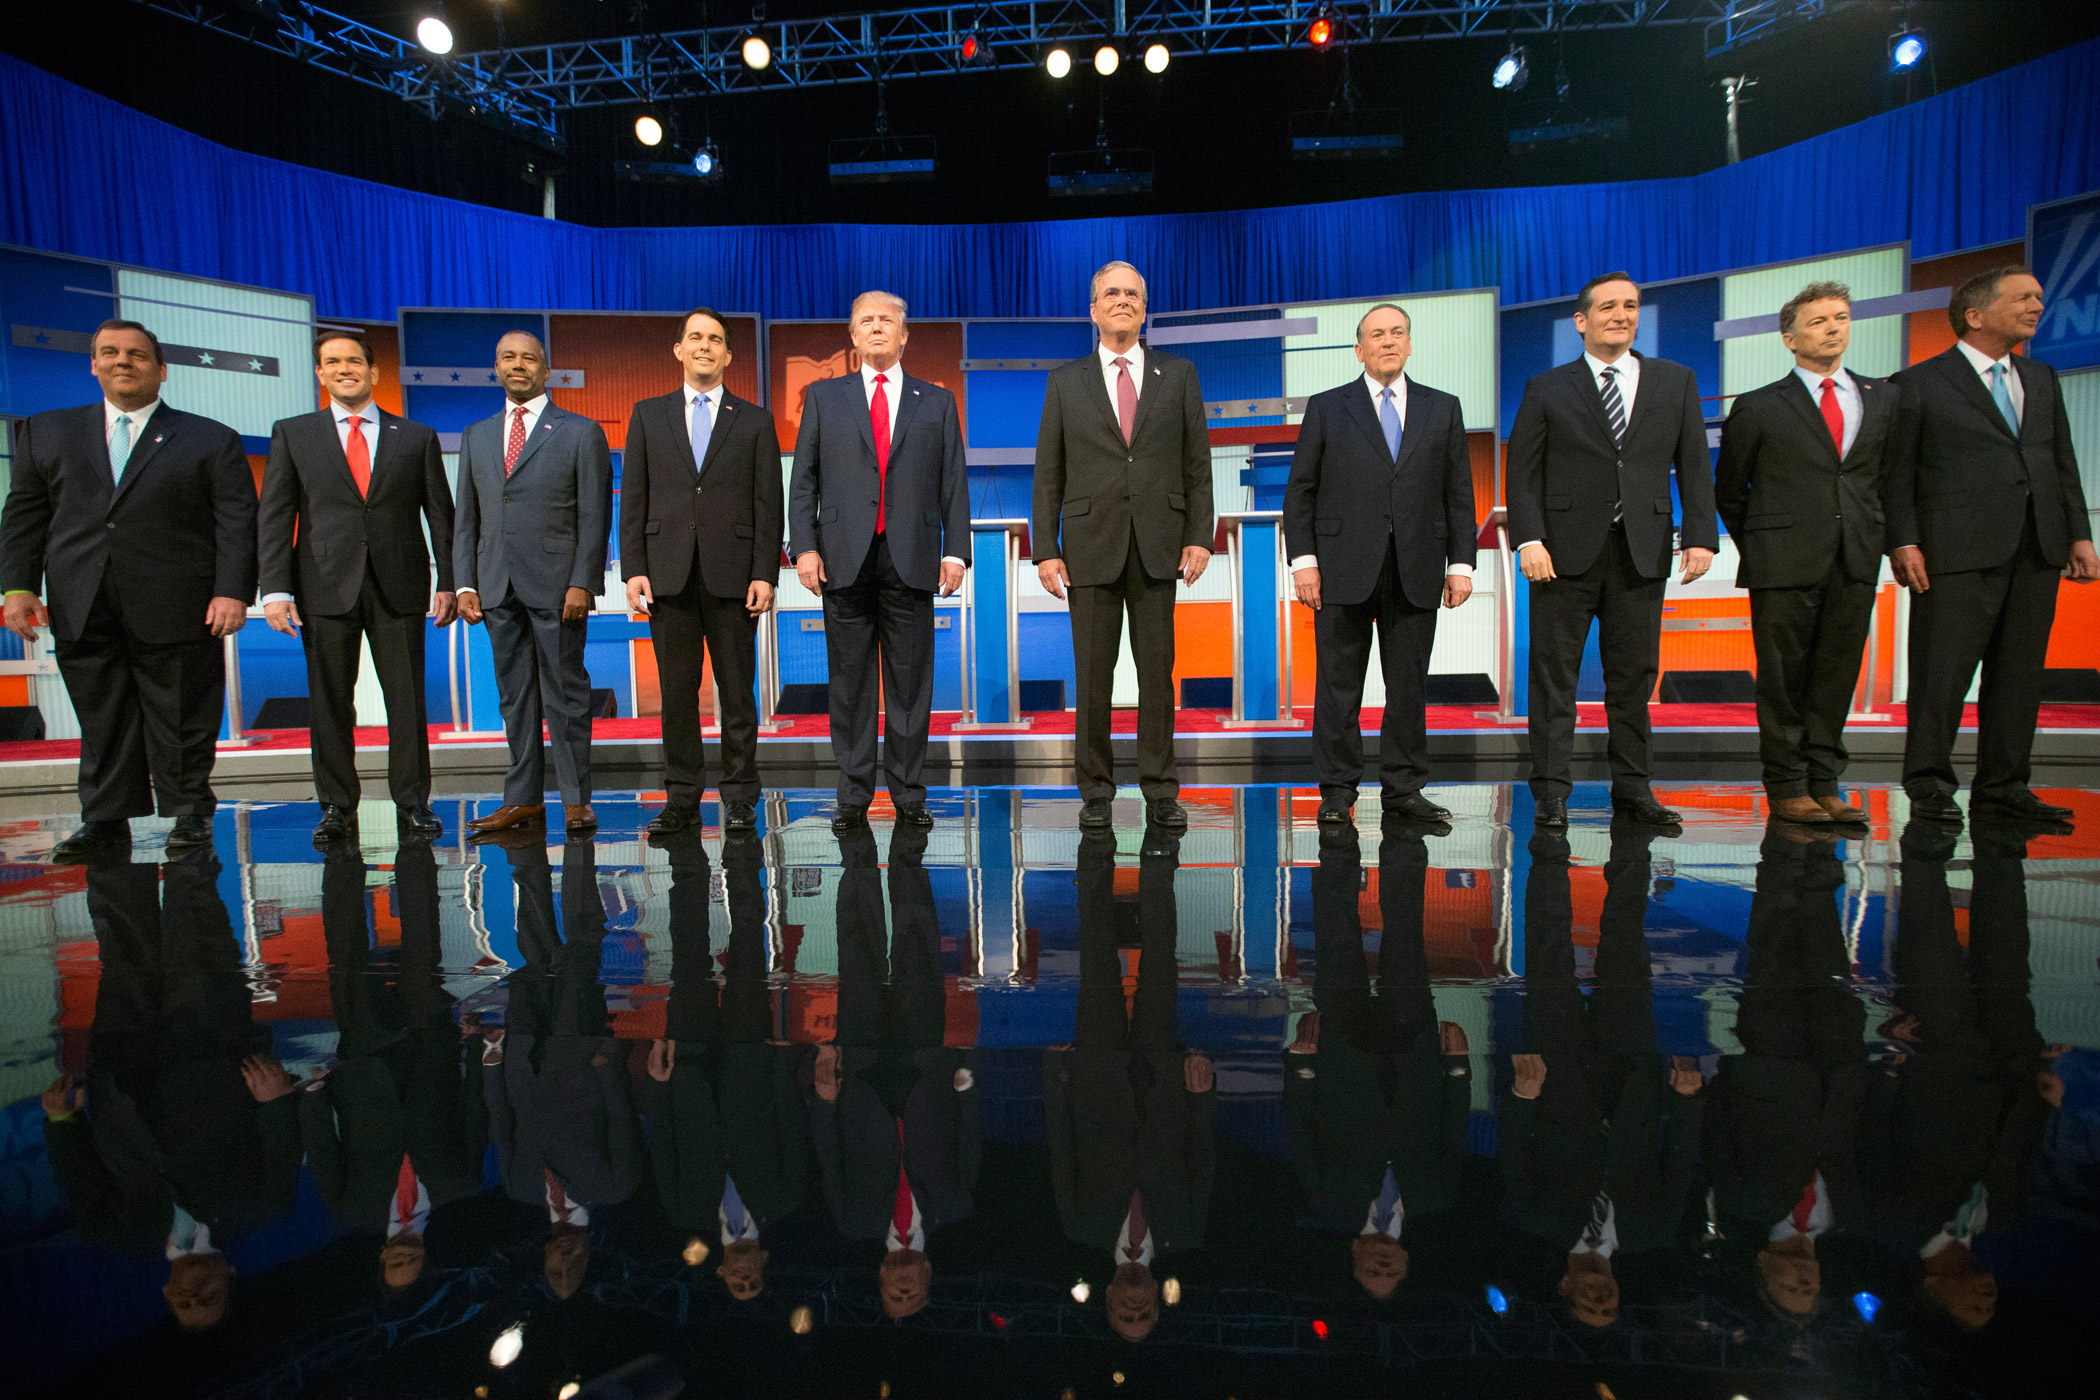 Republican presidential candidates from left, Chris Christie, Marco Rubio, Ben Carson, Scott Walker, Donald Trump, Jeb Bush, Mike Huckabee, Ted Cruz, Rand Paul, and John Kasich take the stage for the first Republican presidential debate on Aug. 6, 2015,  in Cleveland. (Andrew Harnik—AP)